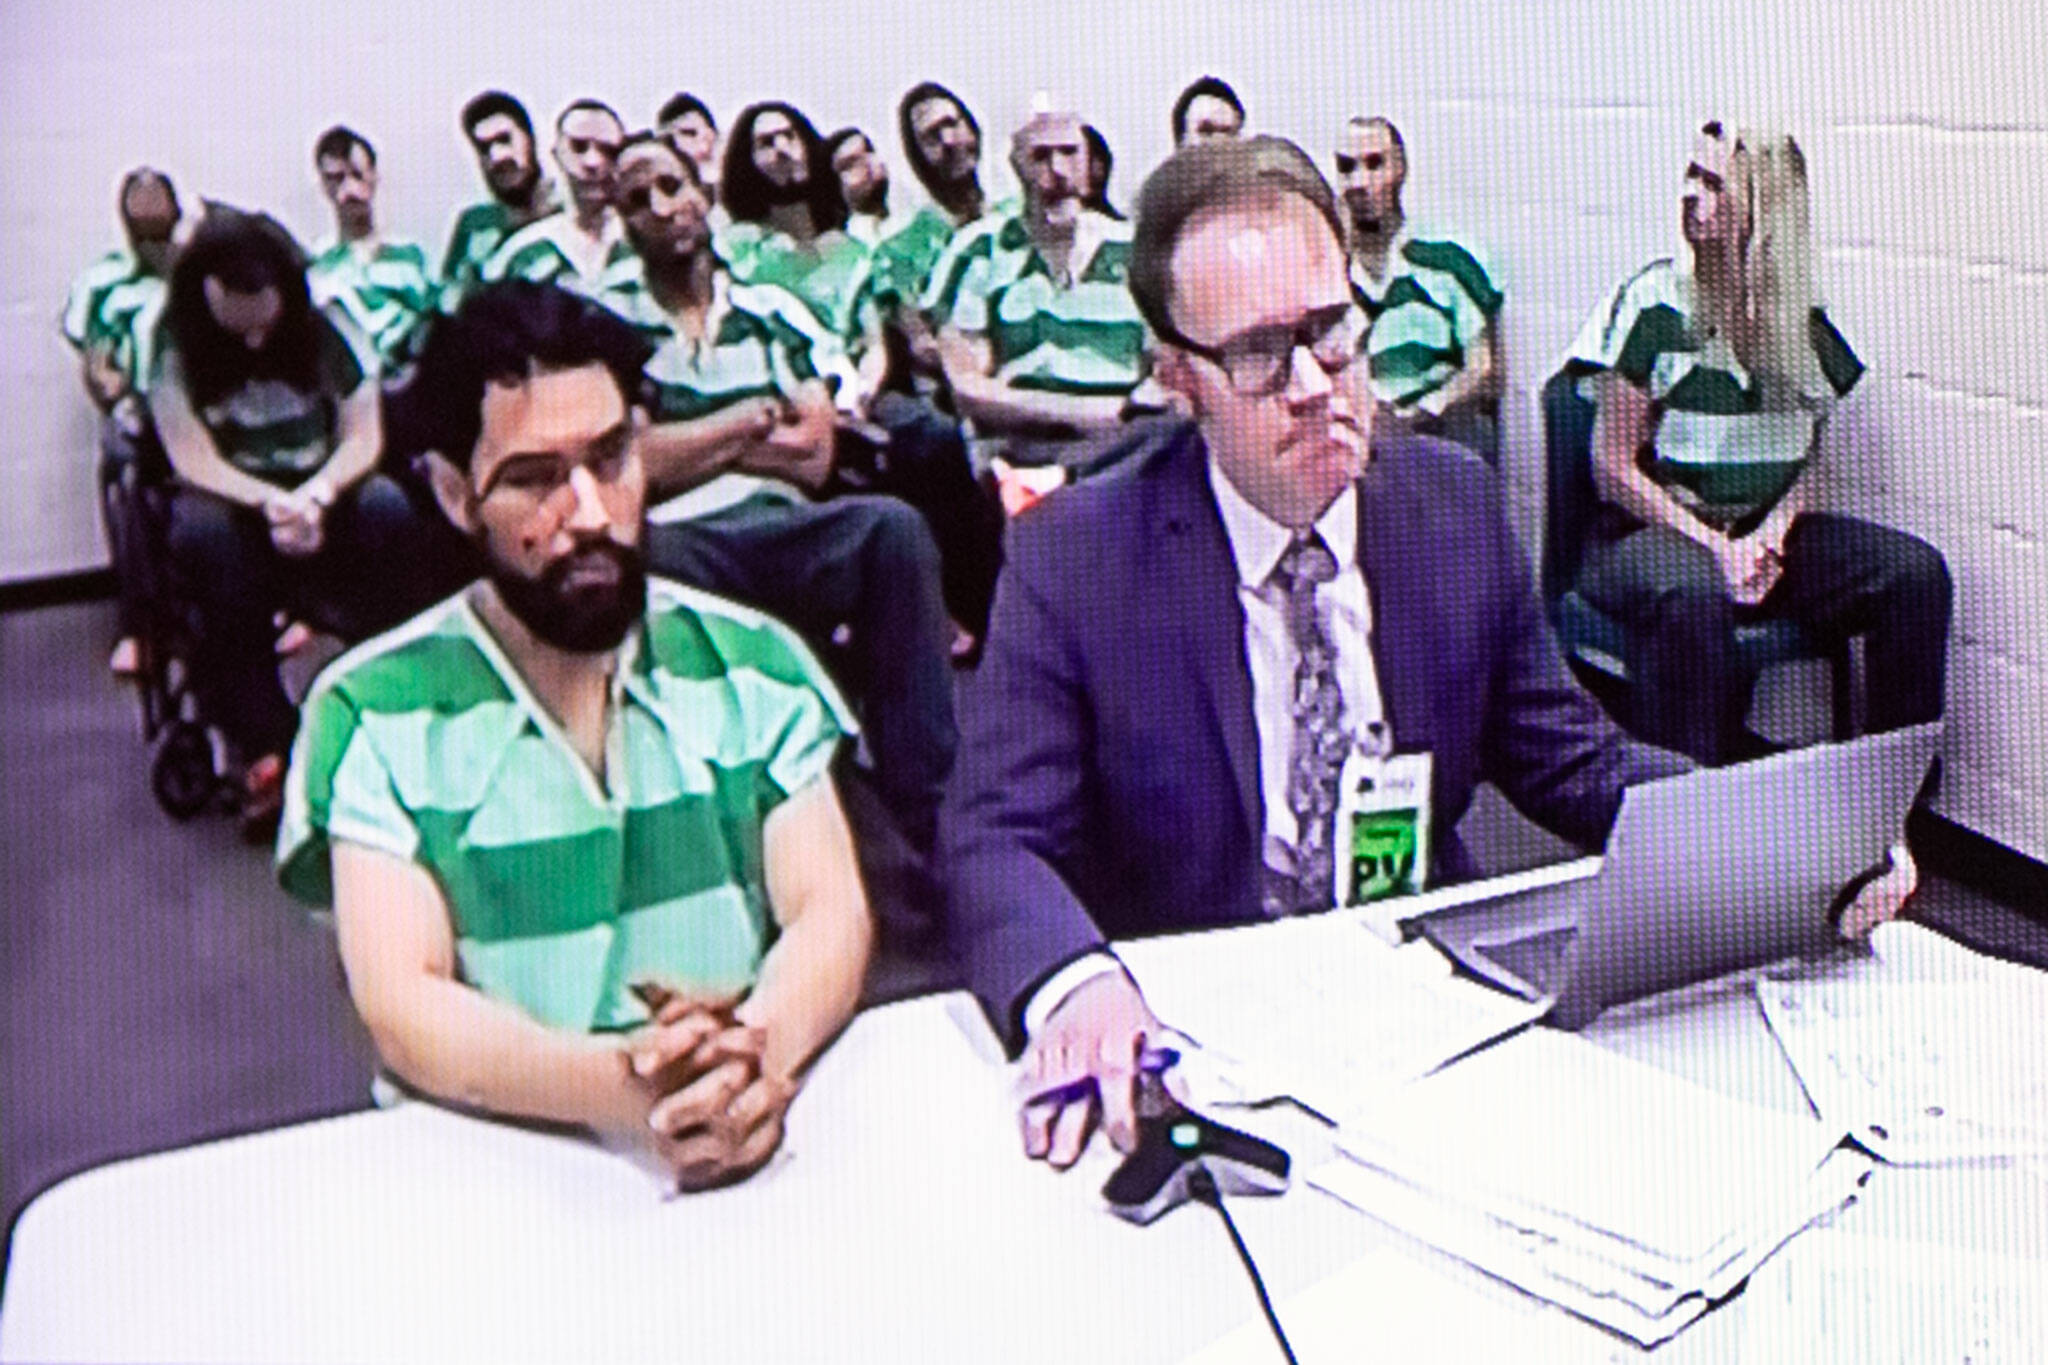 Raul Benitez Santana appears in court via video on charges of vehicular homicide Monday, March 4 at Snohomish County Superior Court in Everett. (Ryan Berry / Sound Publishing)